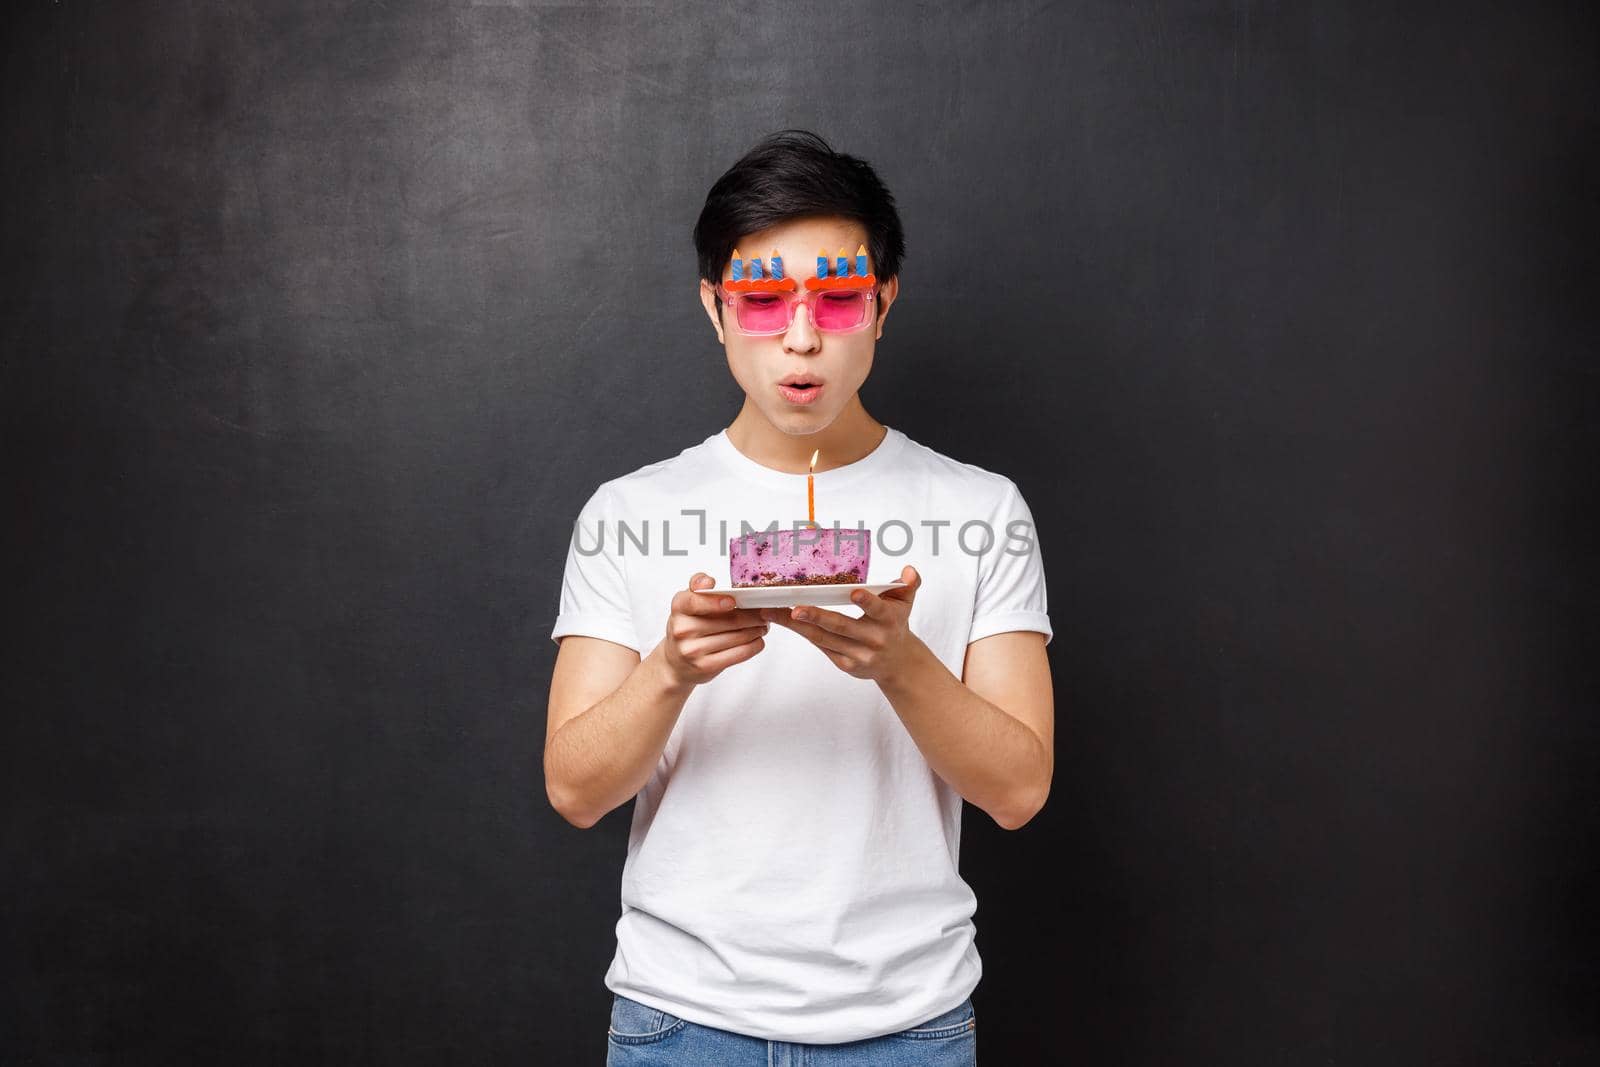 Birthday, celebration and party concept. Portrait of young asian guy grew up, wear funny sunglasses celebrating b-day blowing out candle on cake to make wish, standing black background.